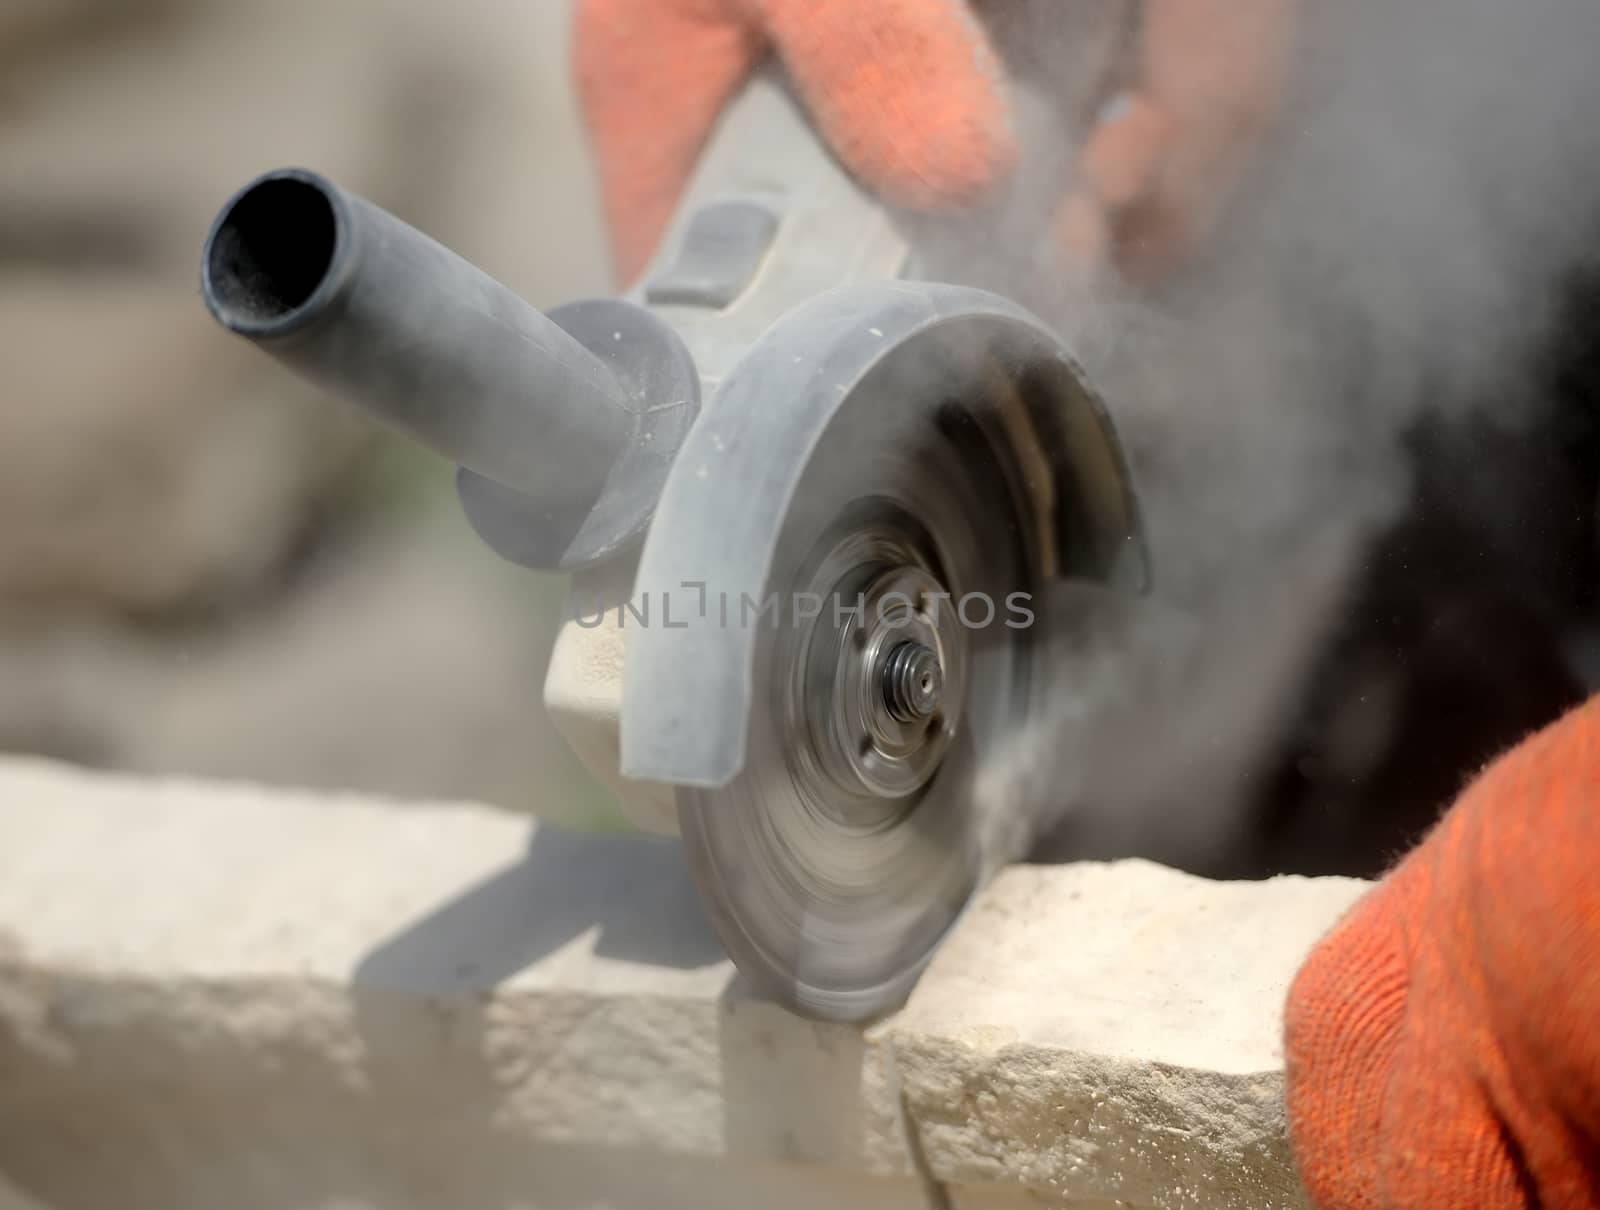 Grinder worker cuts a stone the electric tool